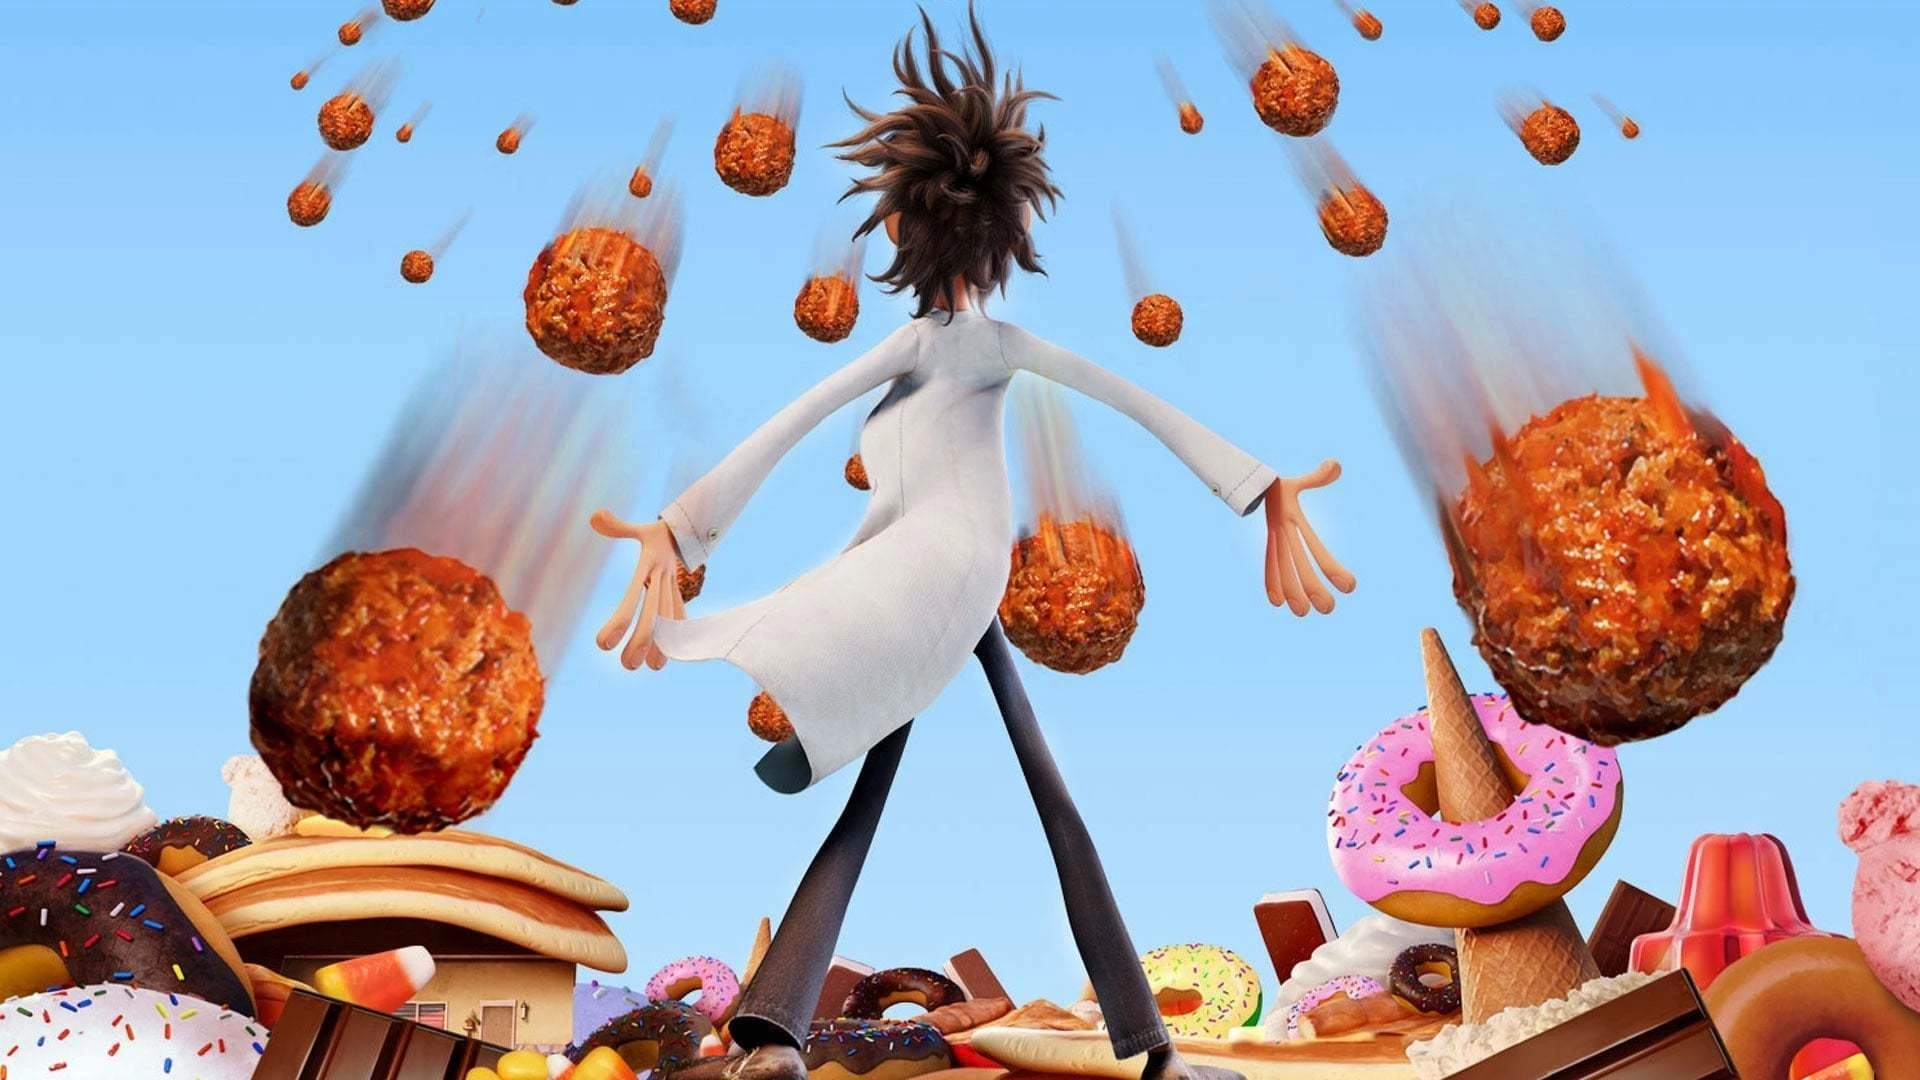 movies like megamind - Cloudy with a Chance of Meatballs (2009)